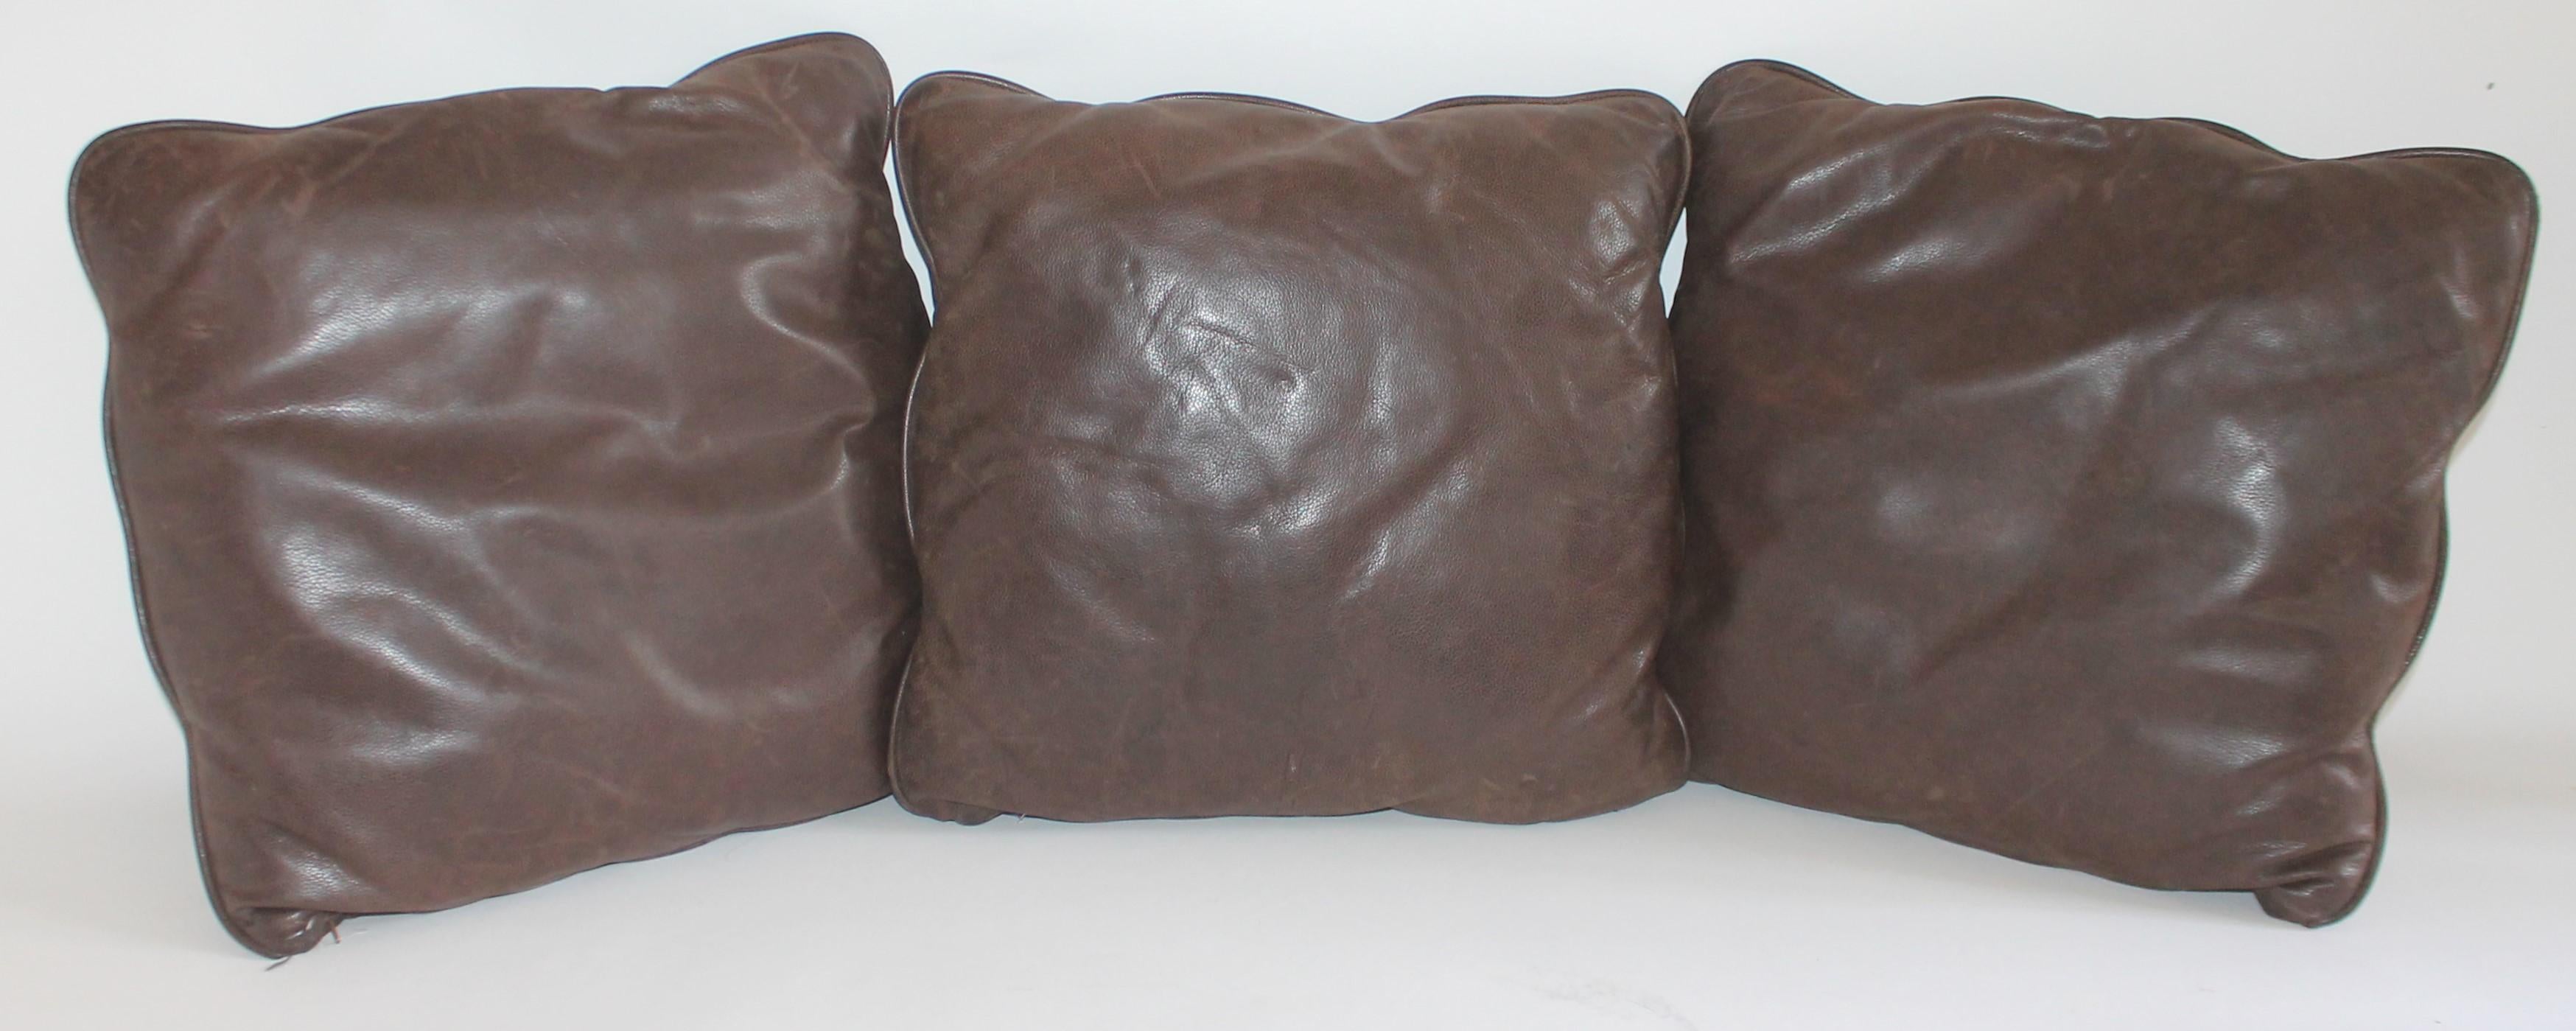 These fine distressed Italian kid glove leather pillows are in fine condition with zippers for removing or cleaning. Sold as a group of three.